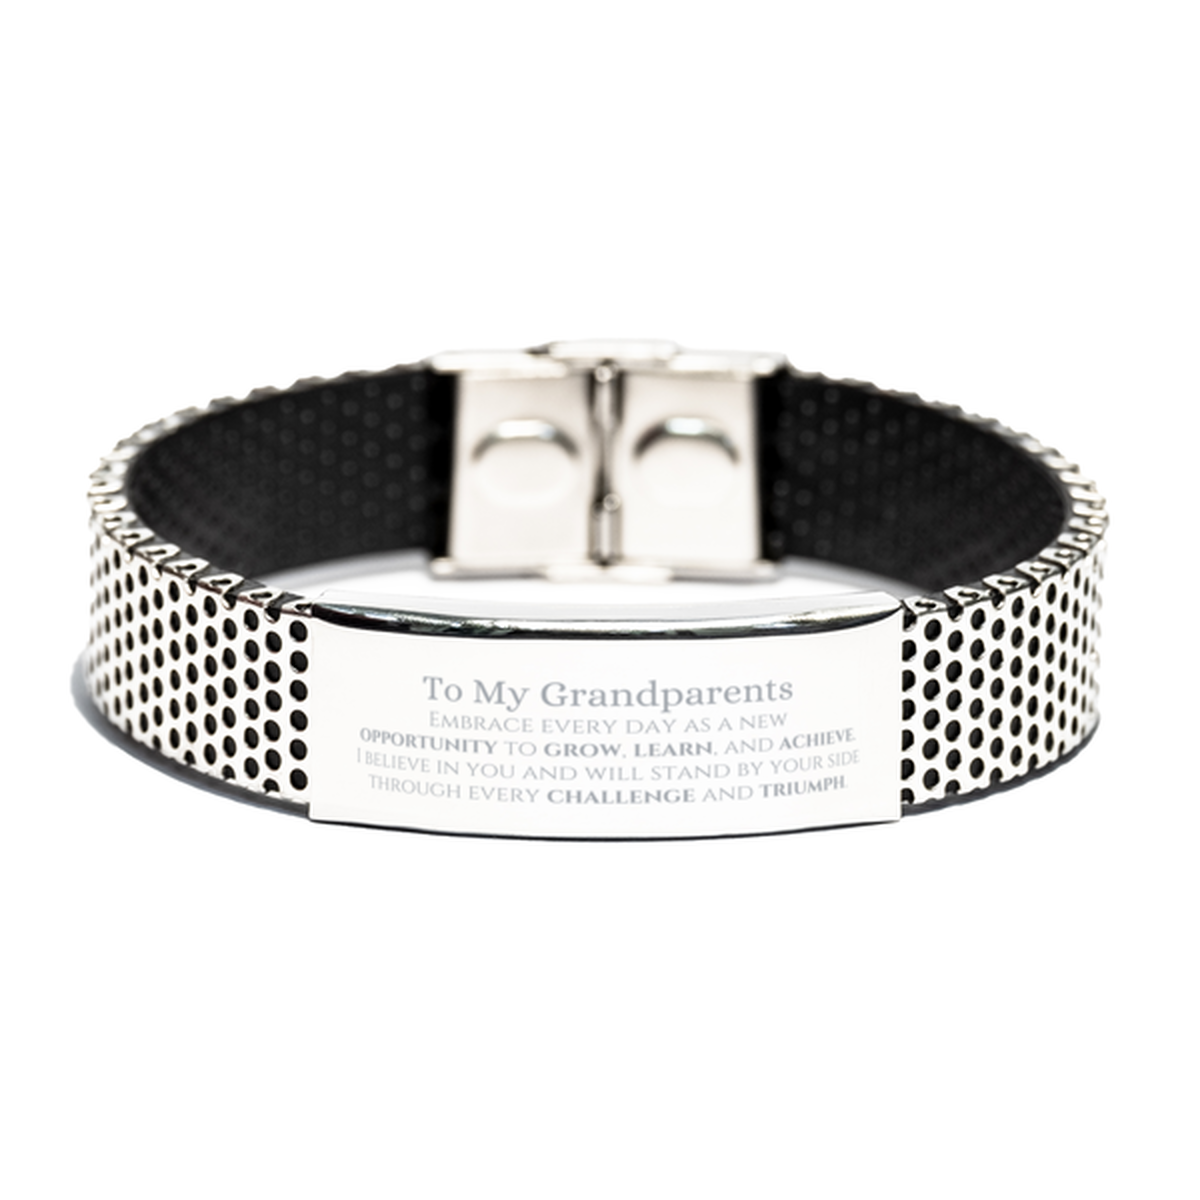 To My Grandparents Gifts, I believe in you and will stand by your side, Inspirational Stainless Steel Bracelet For Grandparents, Birthday Christmas Motivational Grandparents Gifts